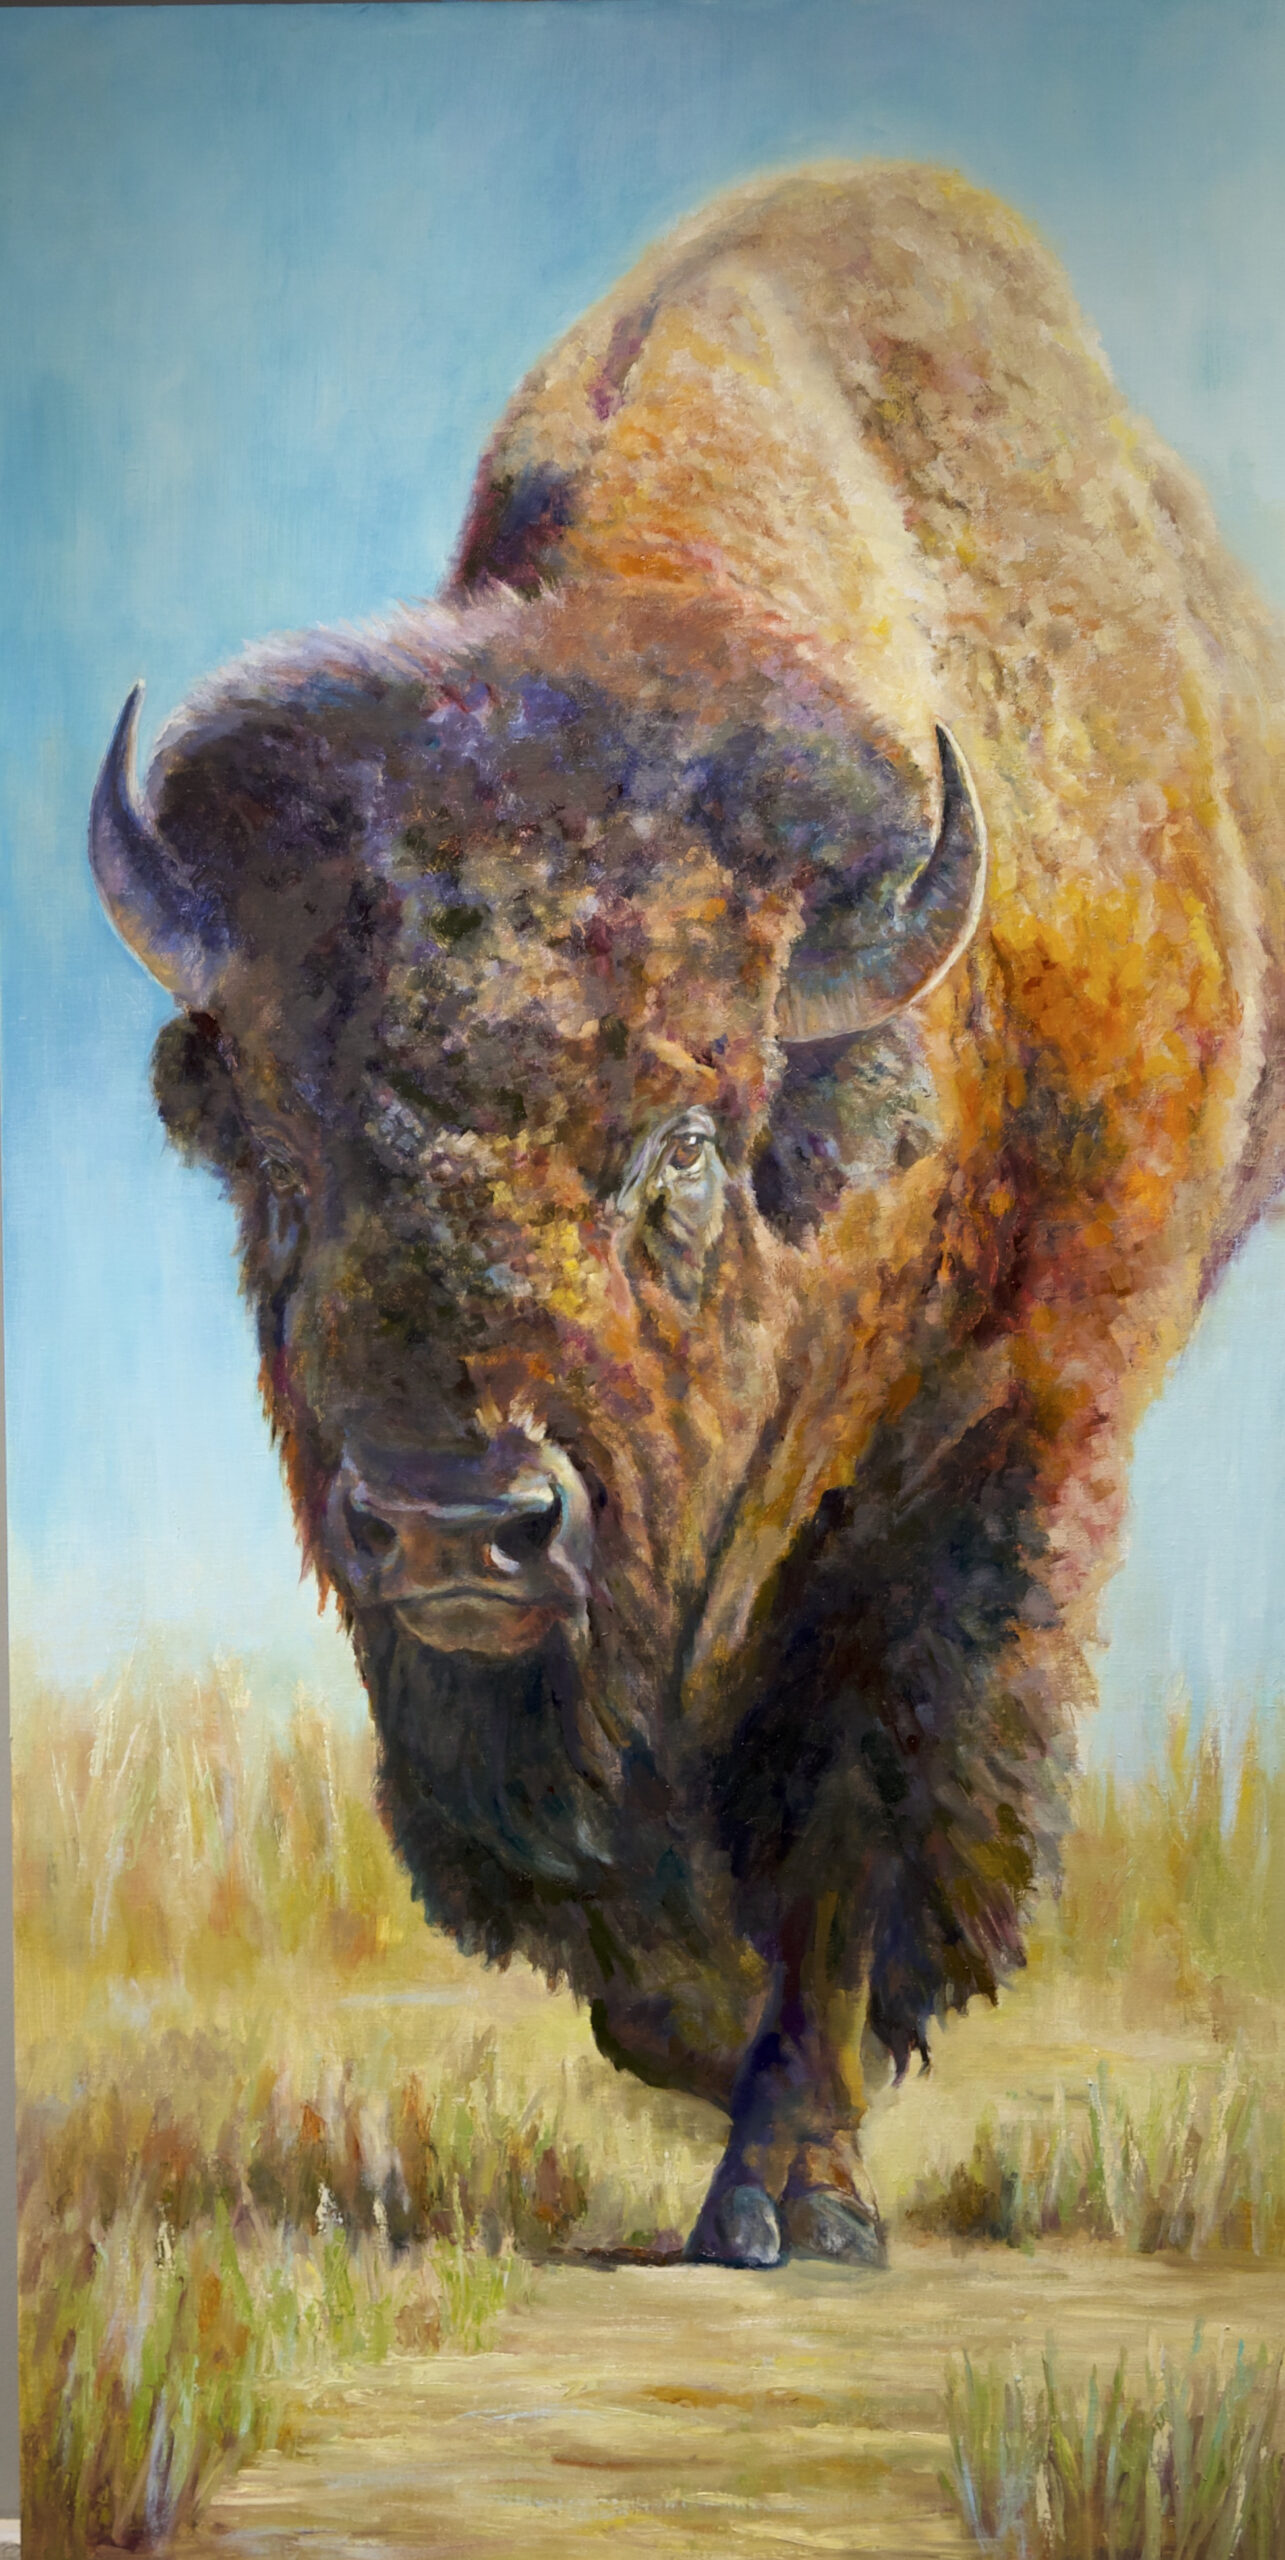 Welcoming Committee
Oil on Linen Panel 60 x 30"
$5,900


